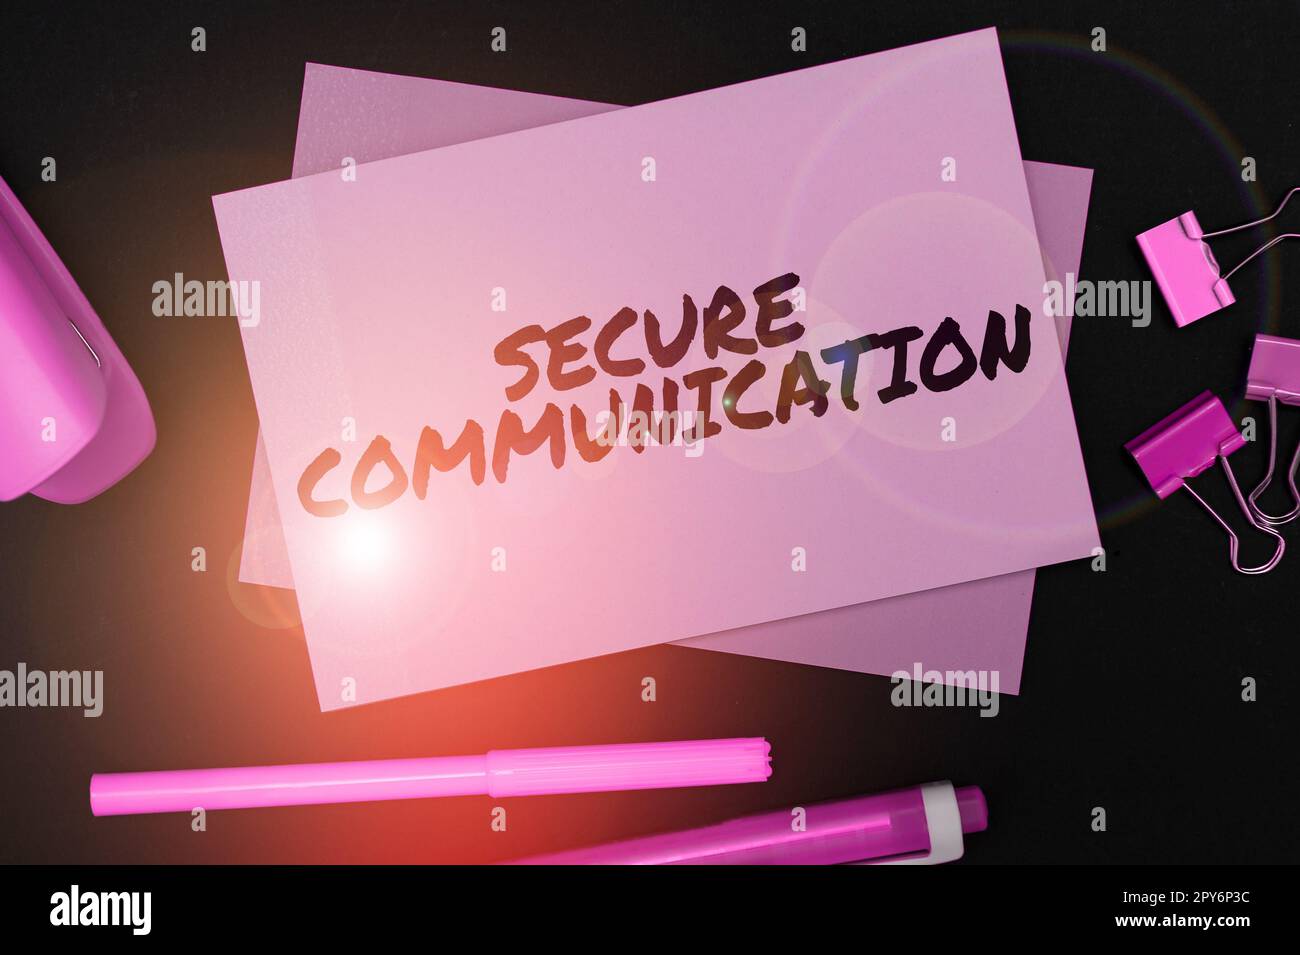 Text caption presenting Secure Communication. Business concept preventing unauthorized interceptors from accessing Stock Photo